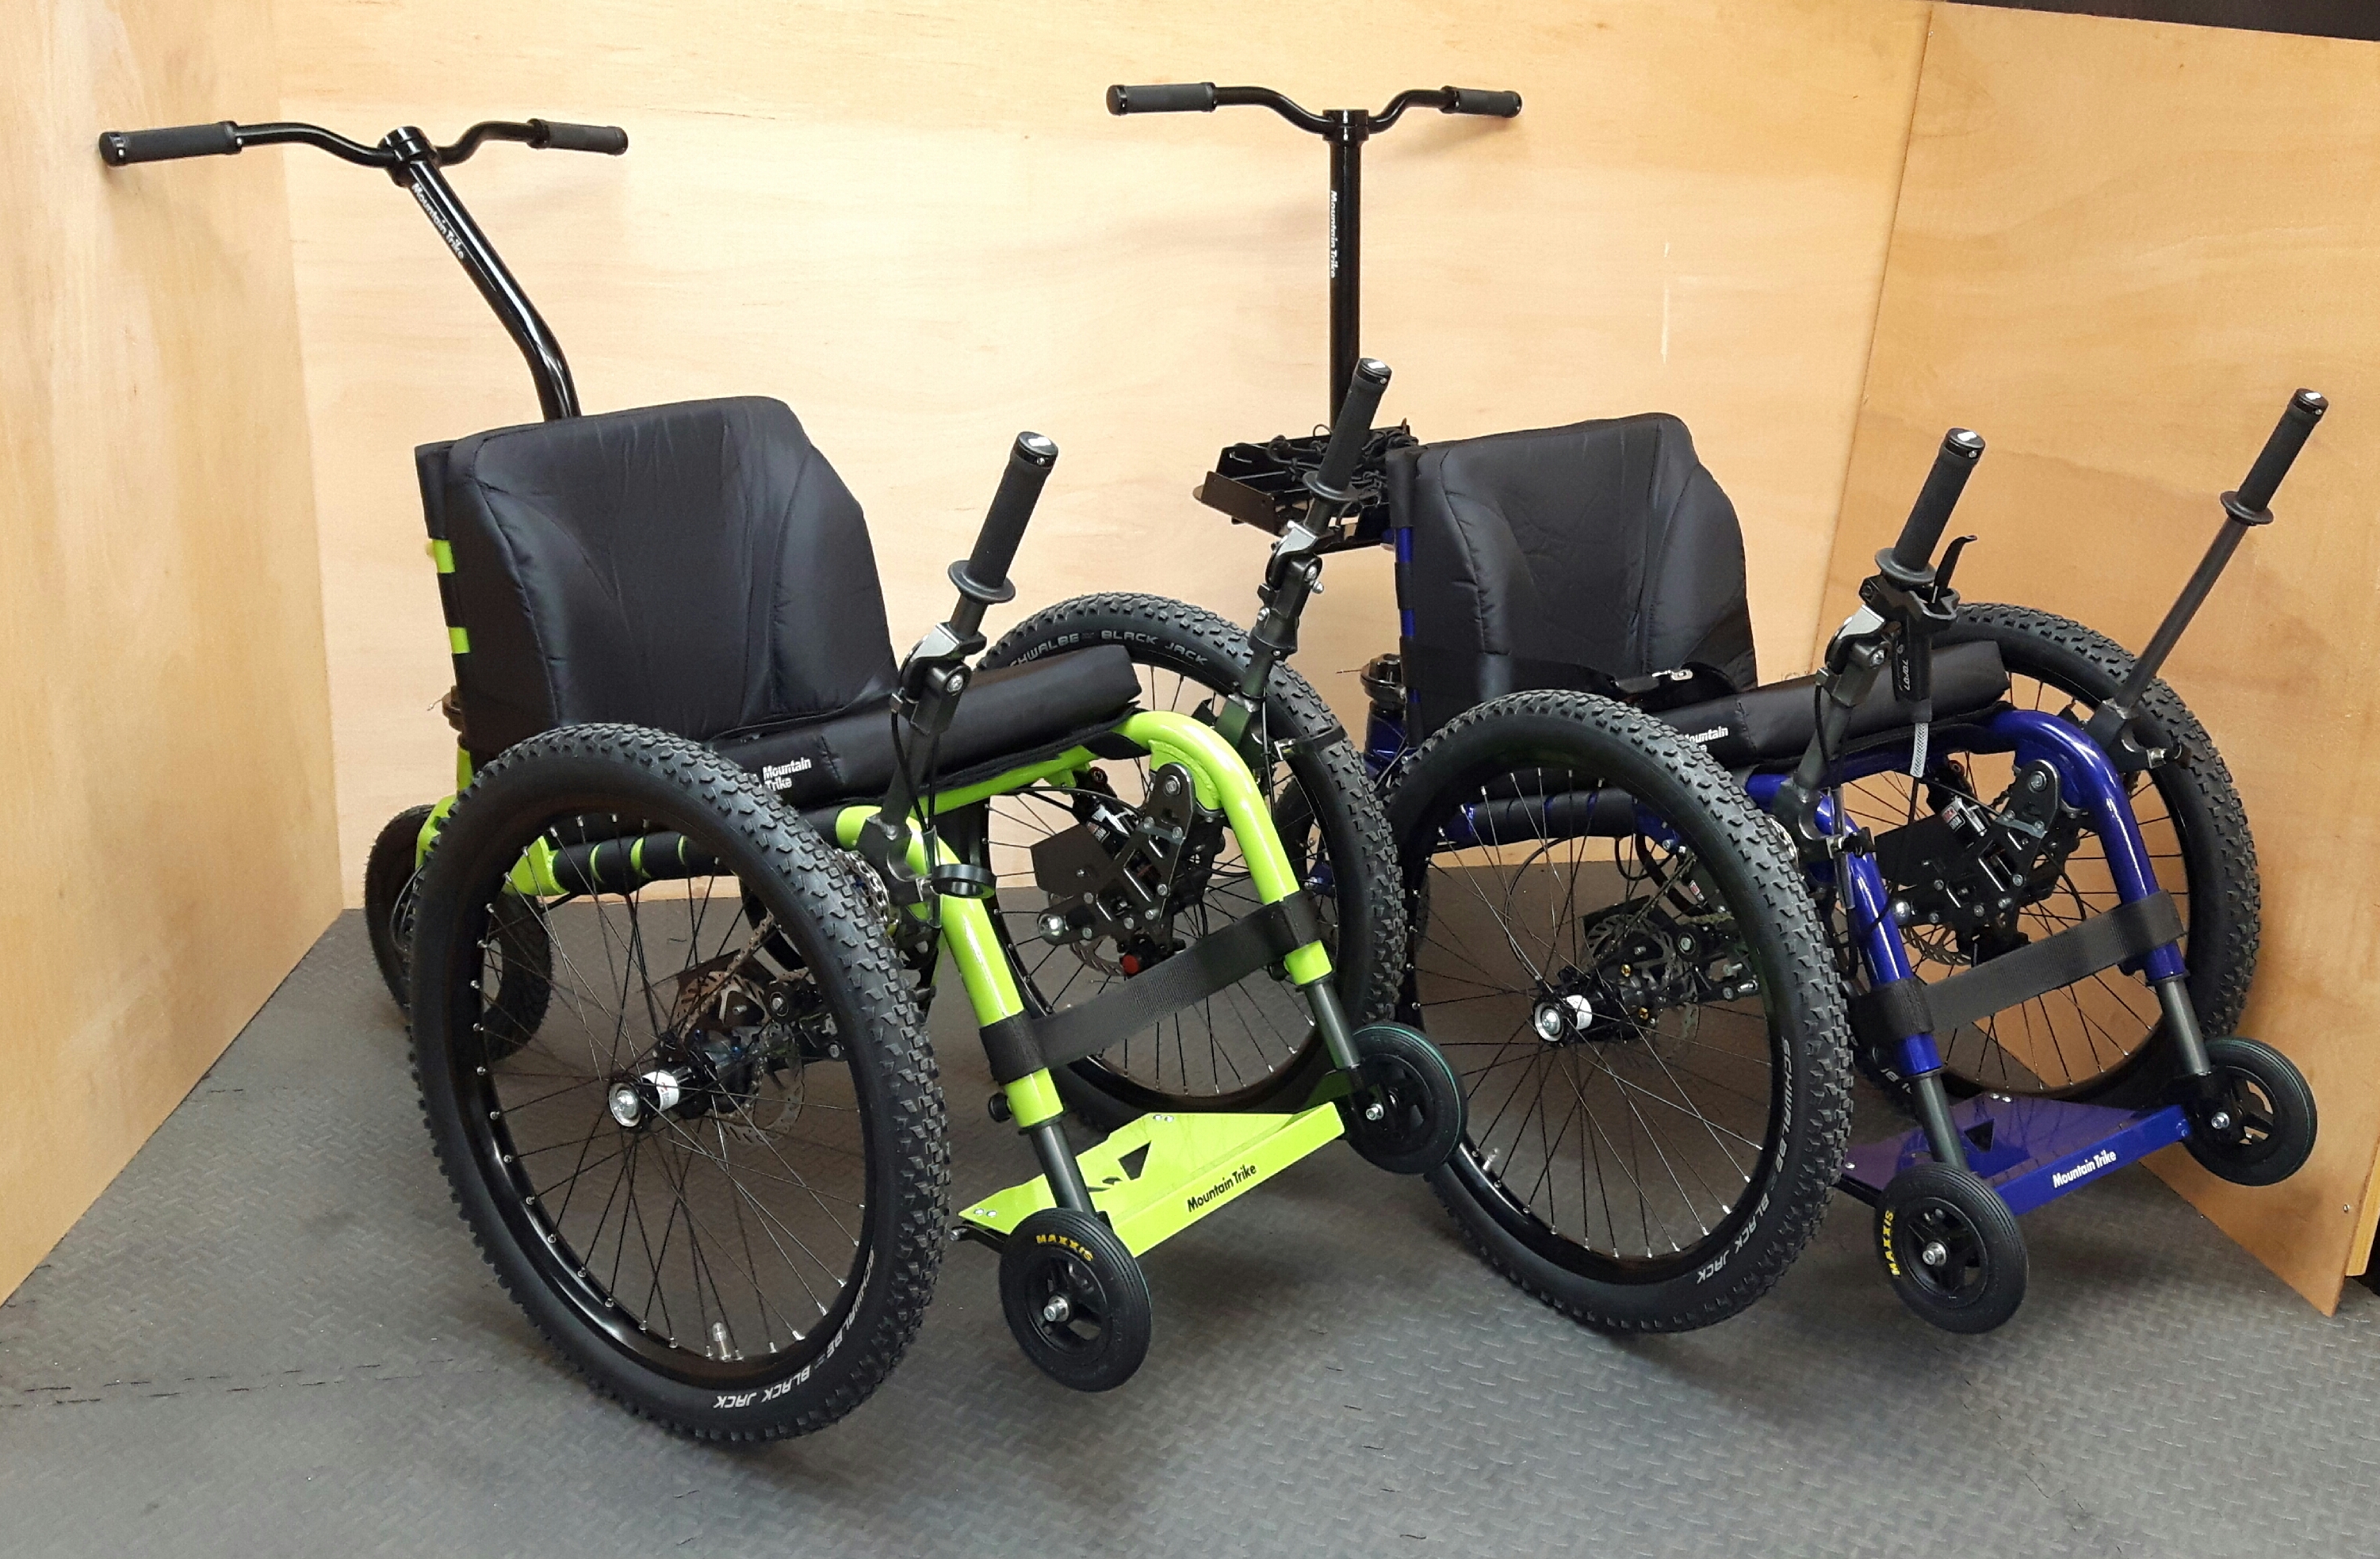 Husband and wife duo become New Zealand distributor for Mountain Trike